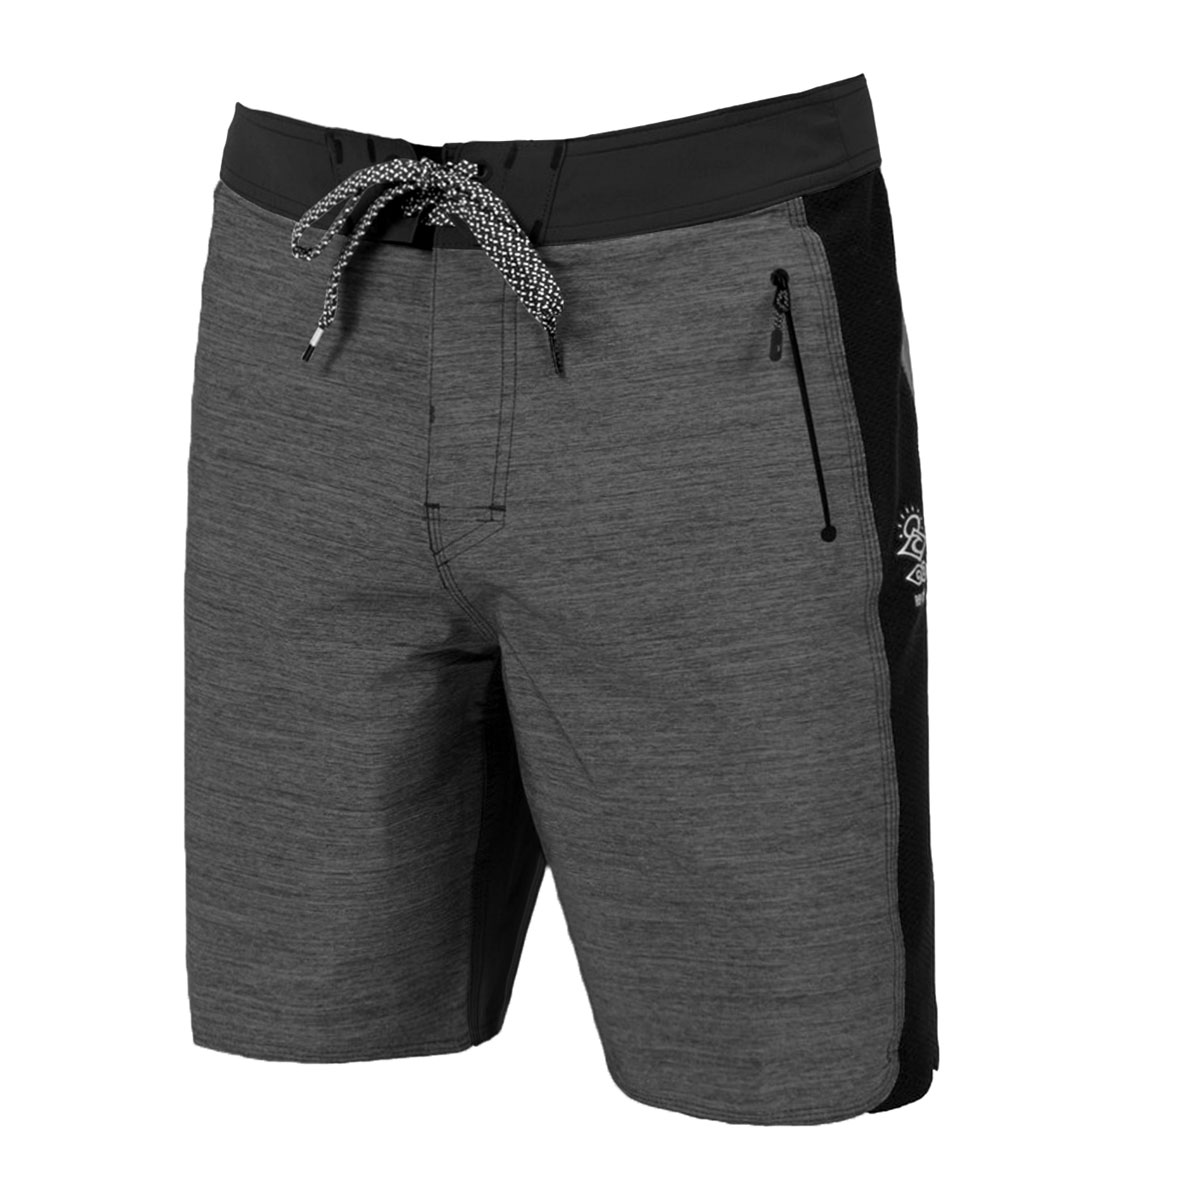 rip curl 3/2/one boardshorts review